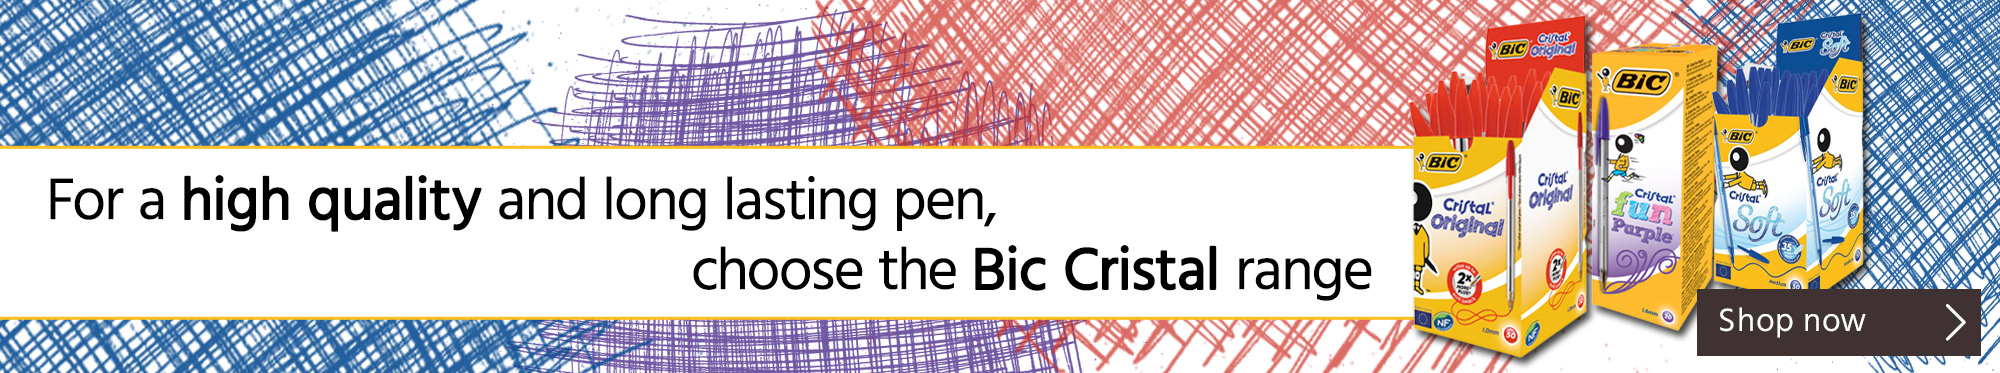 For a High Quality and Long Lasting Pen, Choose the Bic Cristal Range